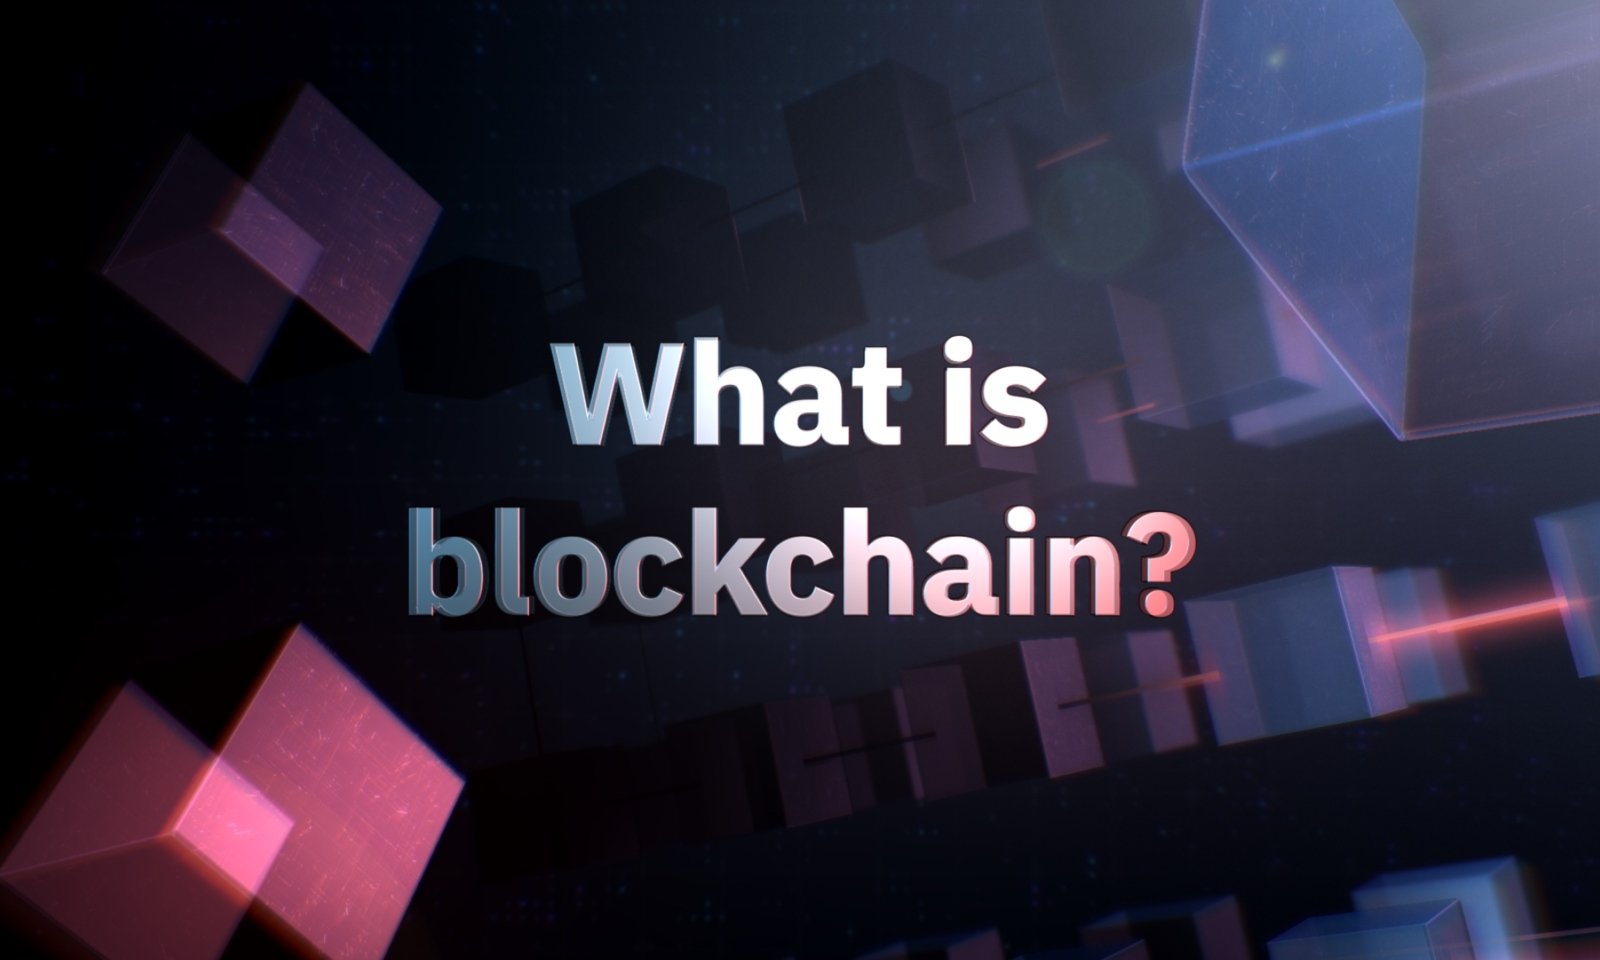 text that says "what is blackchain"